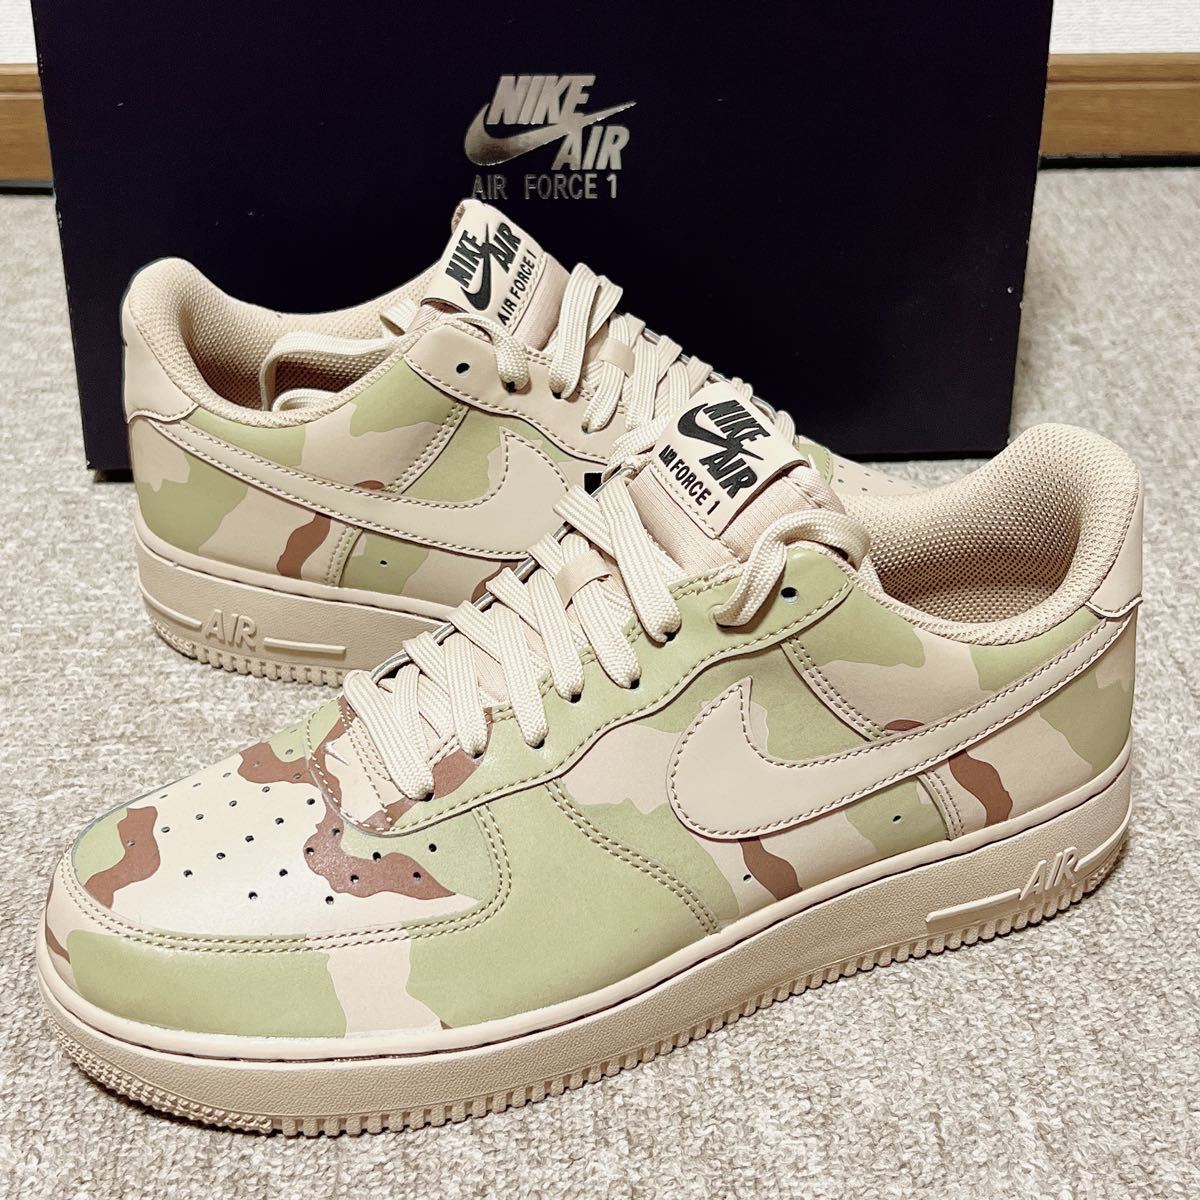 Nike Air Force 1 Low '07 LV8 'Reflective Desert Camo' 718152-204